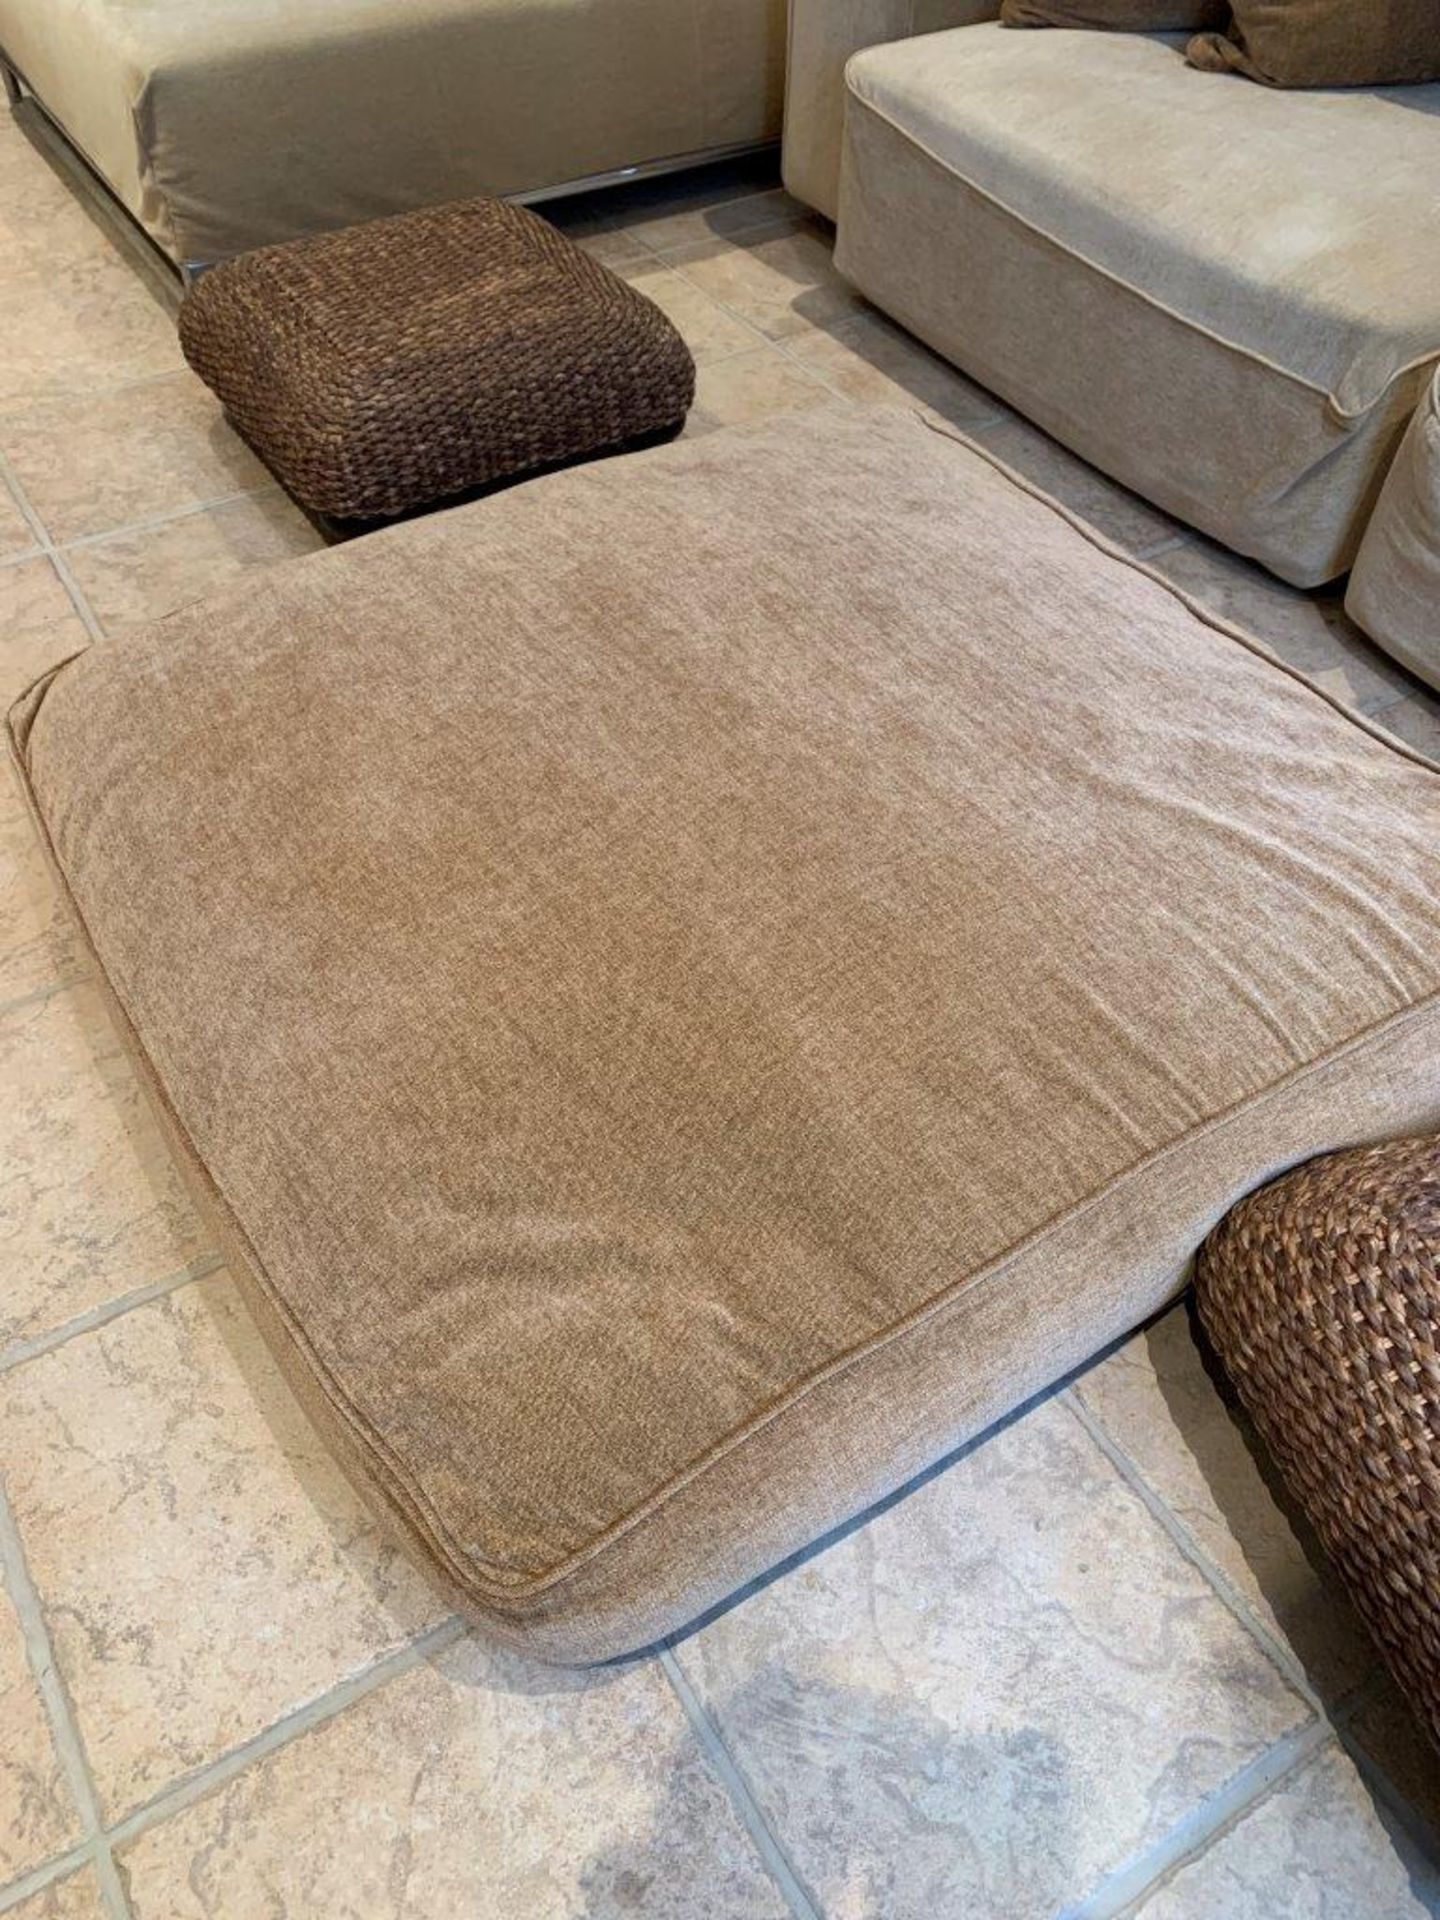 Light brown floor cushion and two rattan stools.